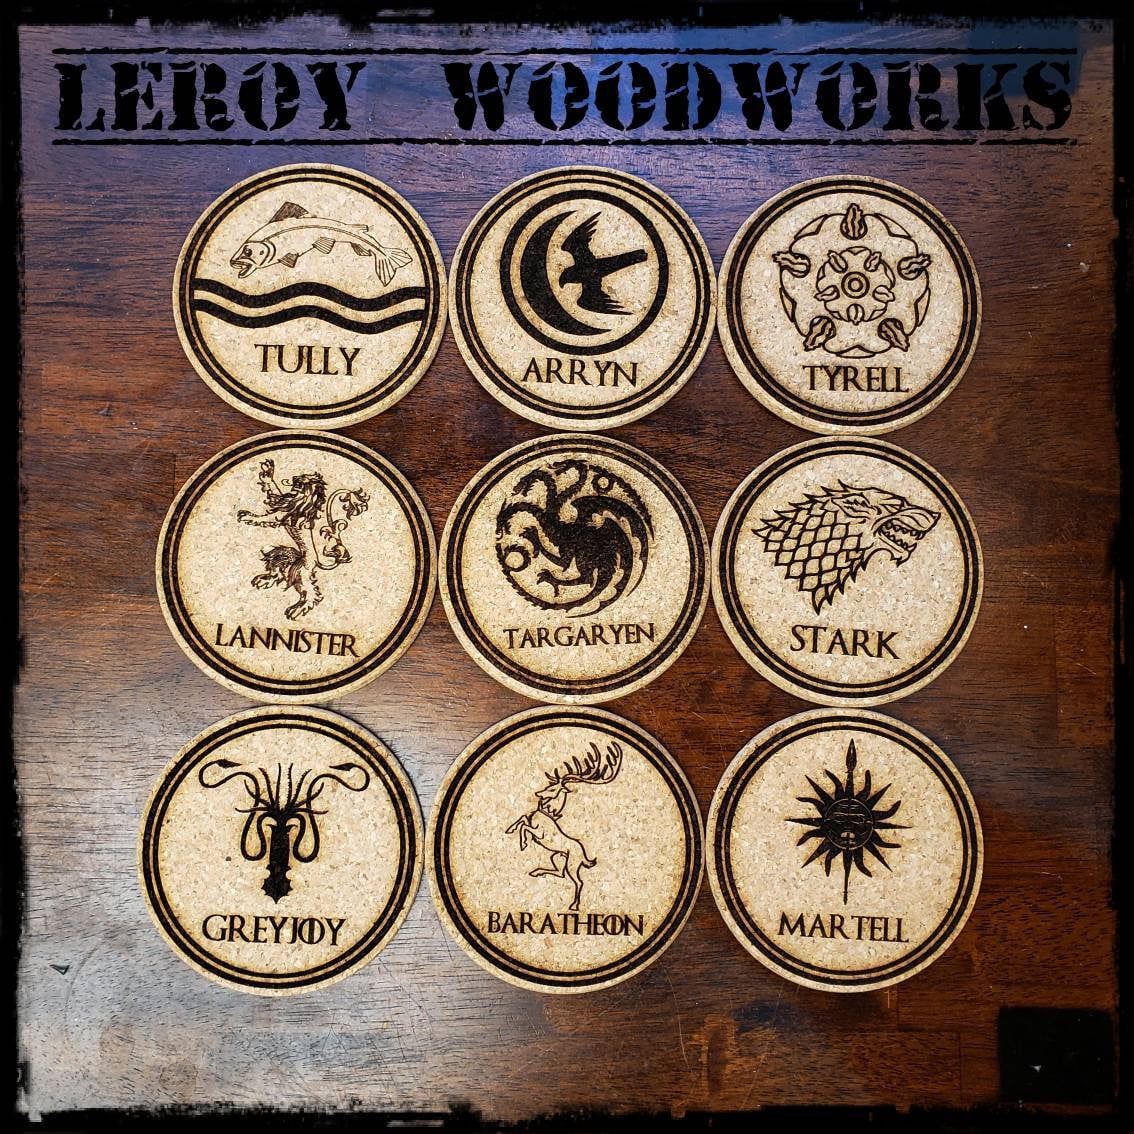 Coaster Game of Thrones - Logo | Tips for original gifts